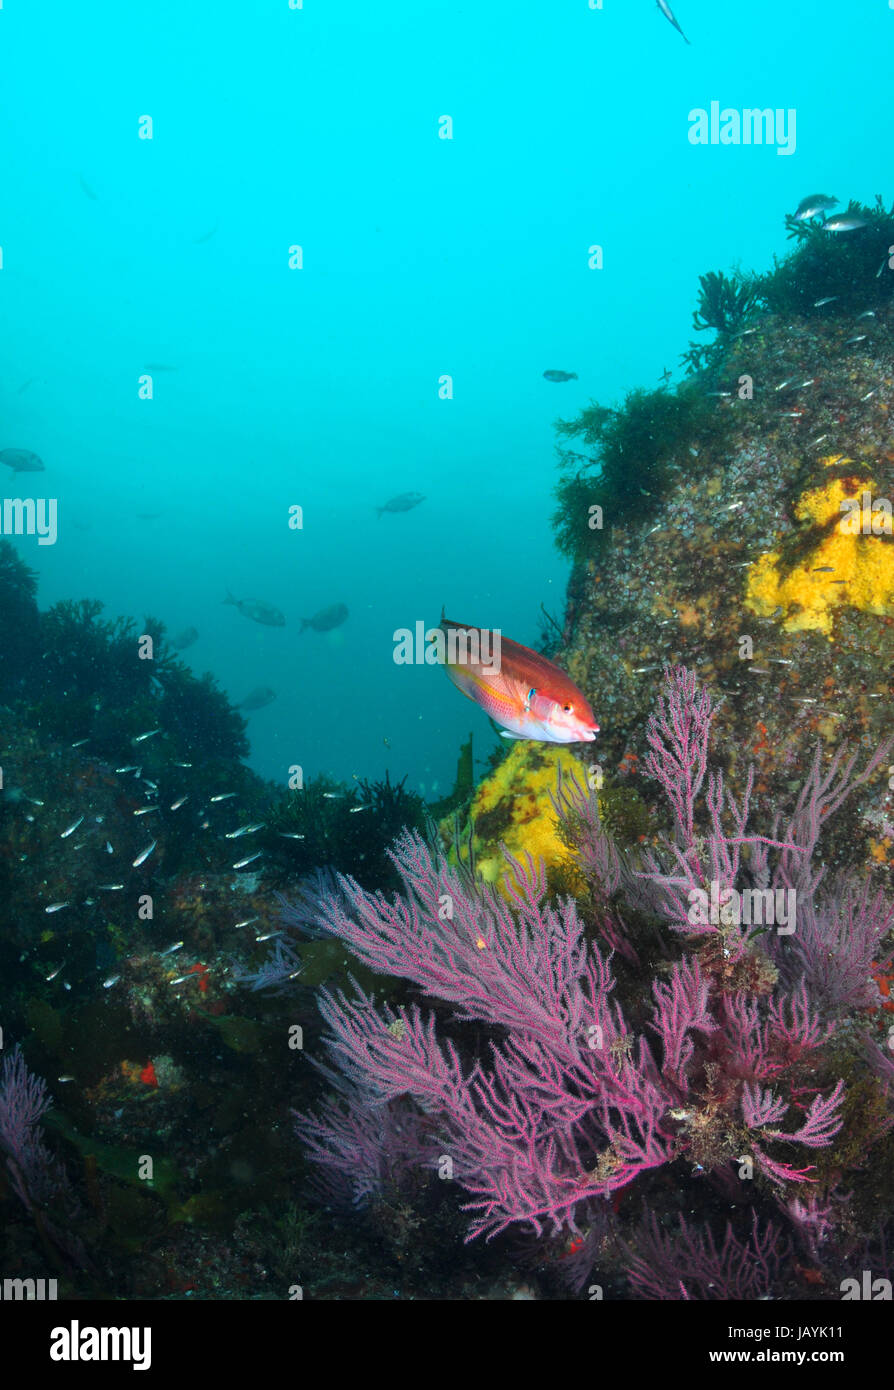 Underwater scene in the Altantic with soft corals and fish Stock Photo